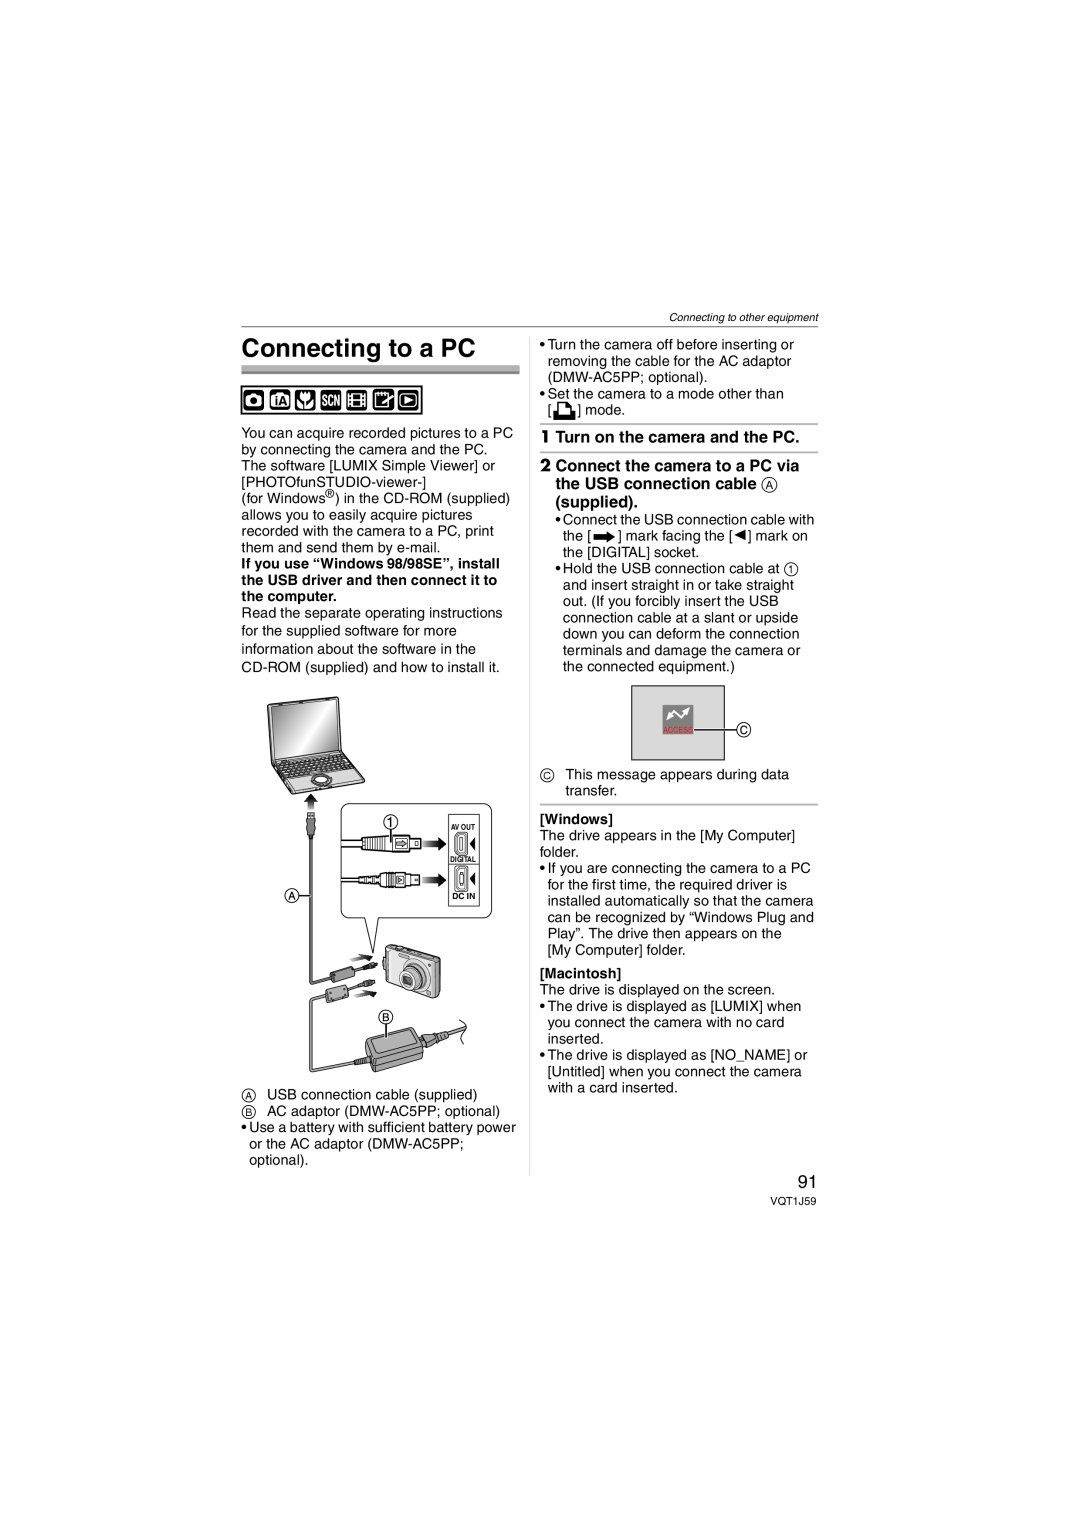 Panasonic DMC-FX55 operating instructions Connecting to a PC, Turn on the camera and the PC, Windows, Macintosh 